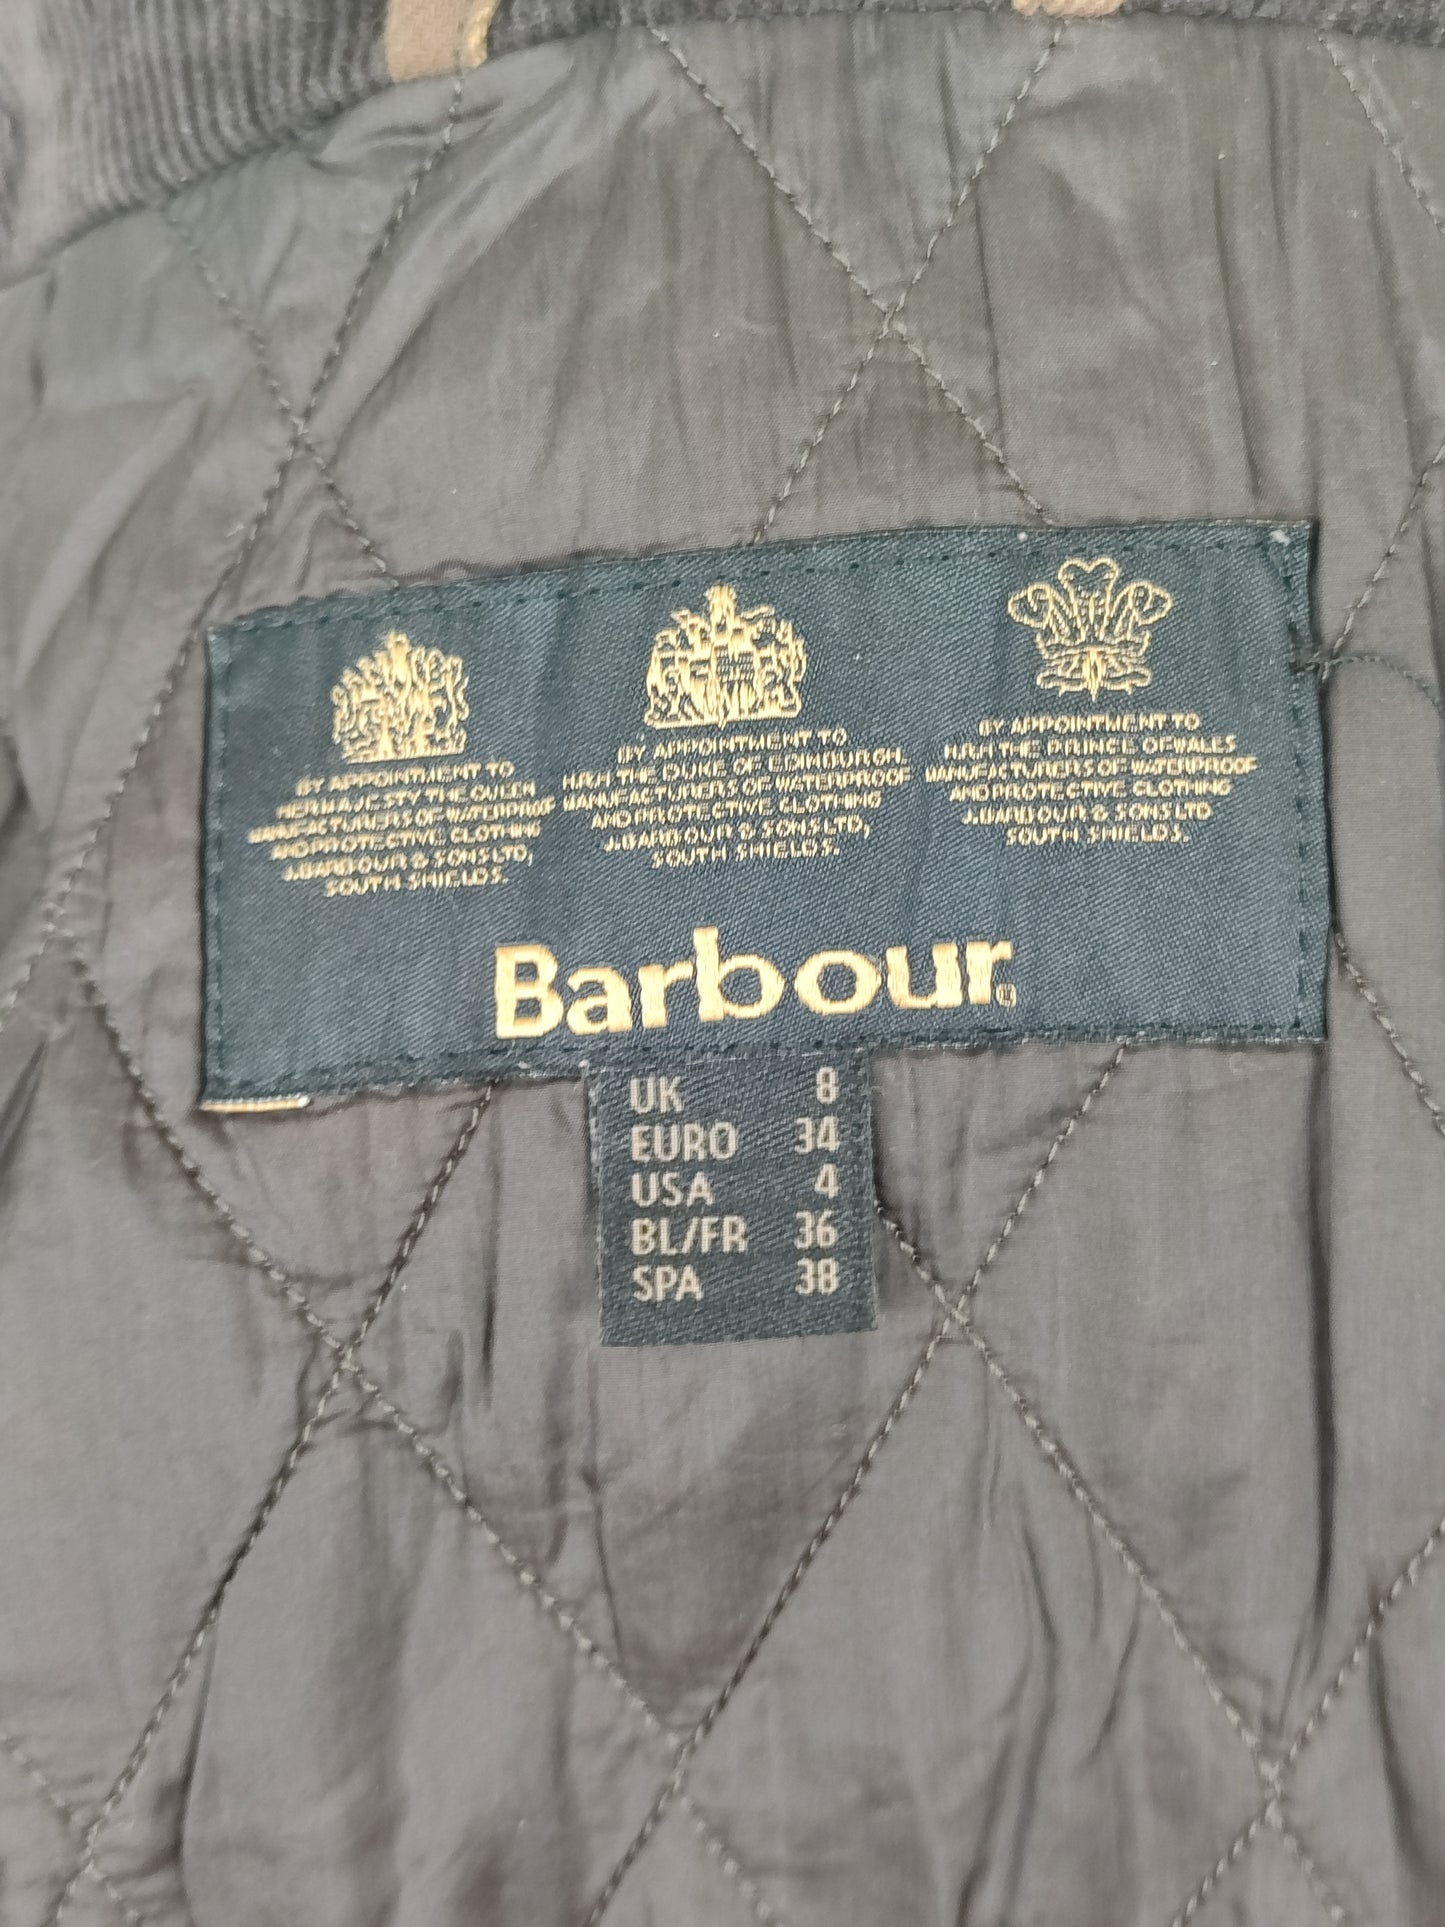 Giacca Barbour donna marrone Rebel UK8 XSmall Brown Lady Wax Rebel jacket XSmall tg.38